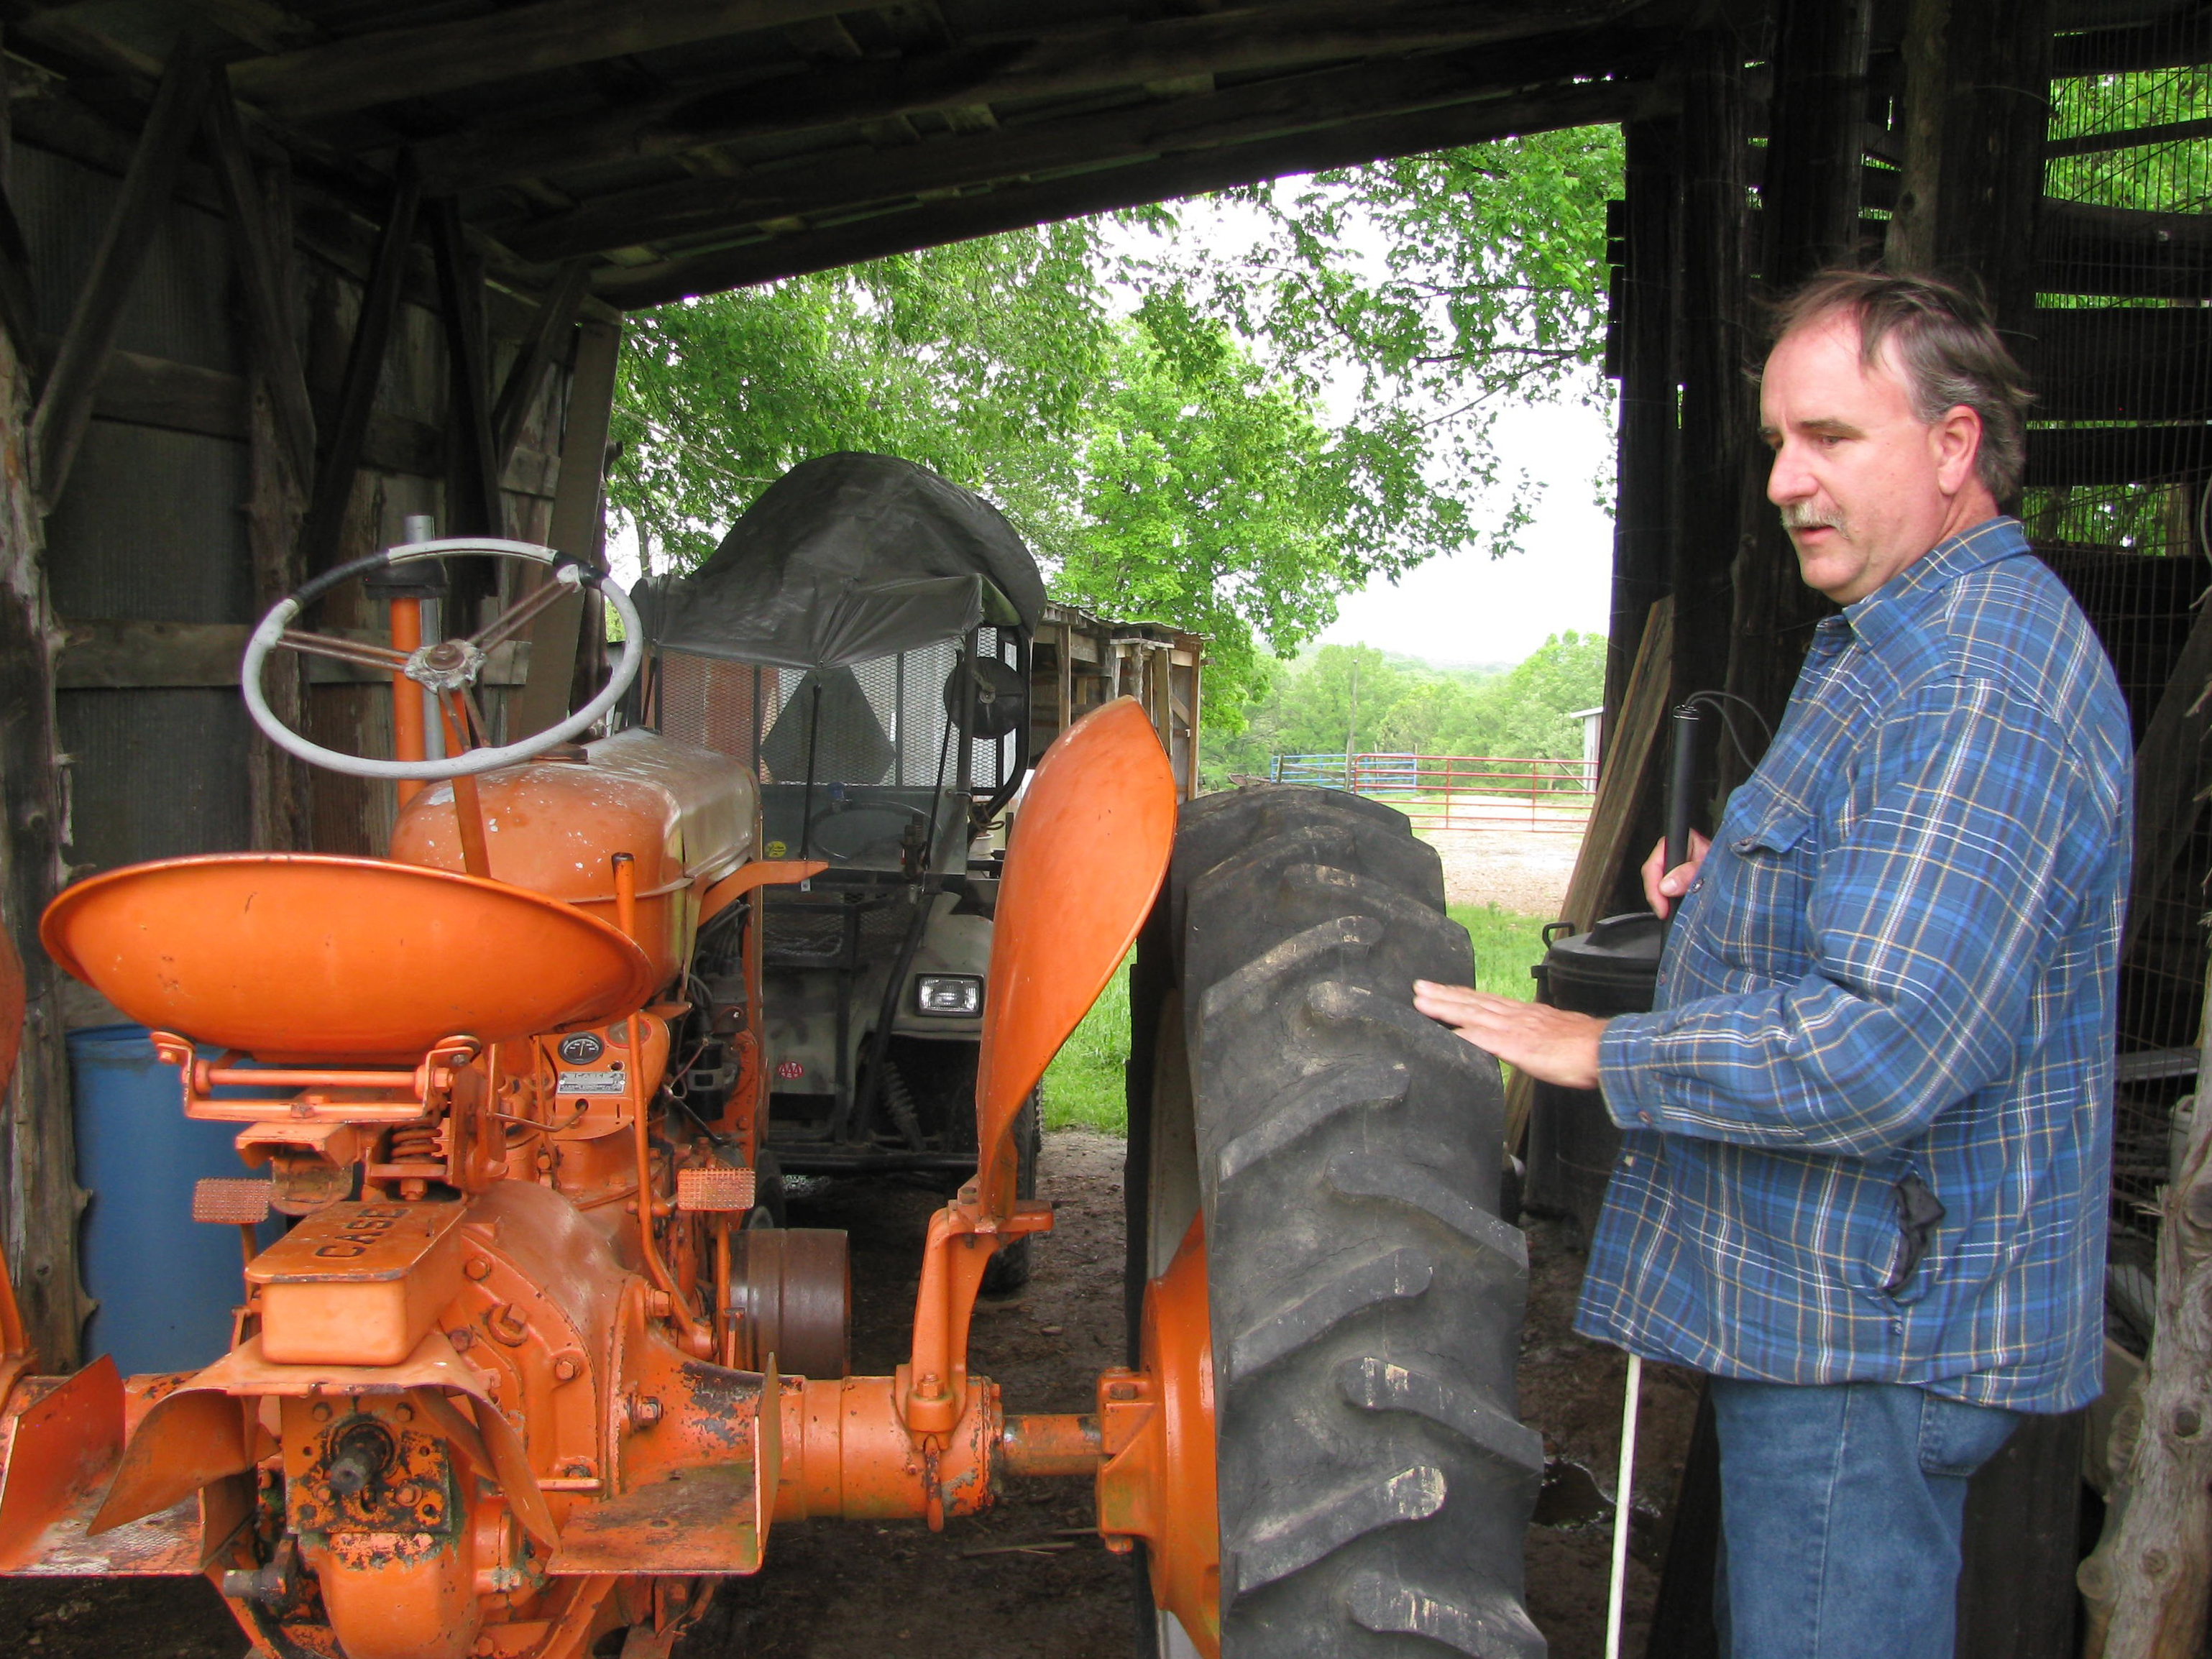 Brinkmann restores J.I. Case tractors. His grandfather and father owned and operated the J.I. Case dealership in Morrison, and Brinkmann uses mechanical skills learned before his blindness.